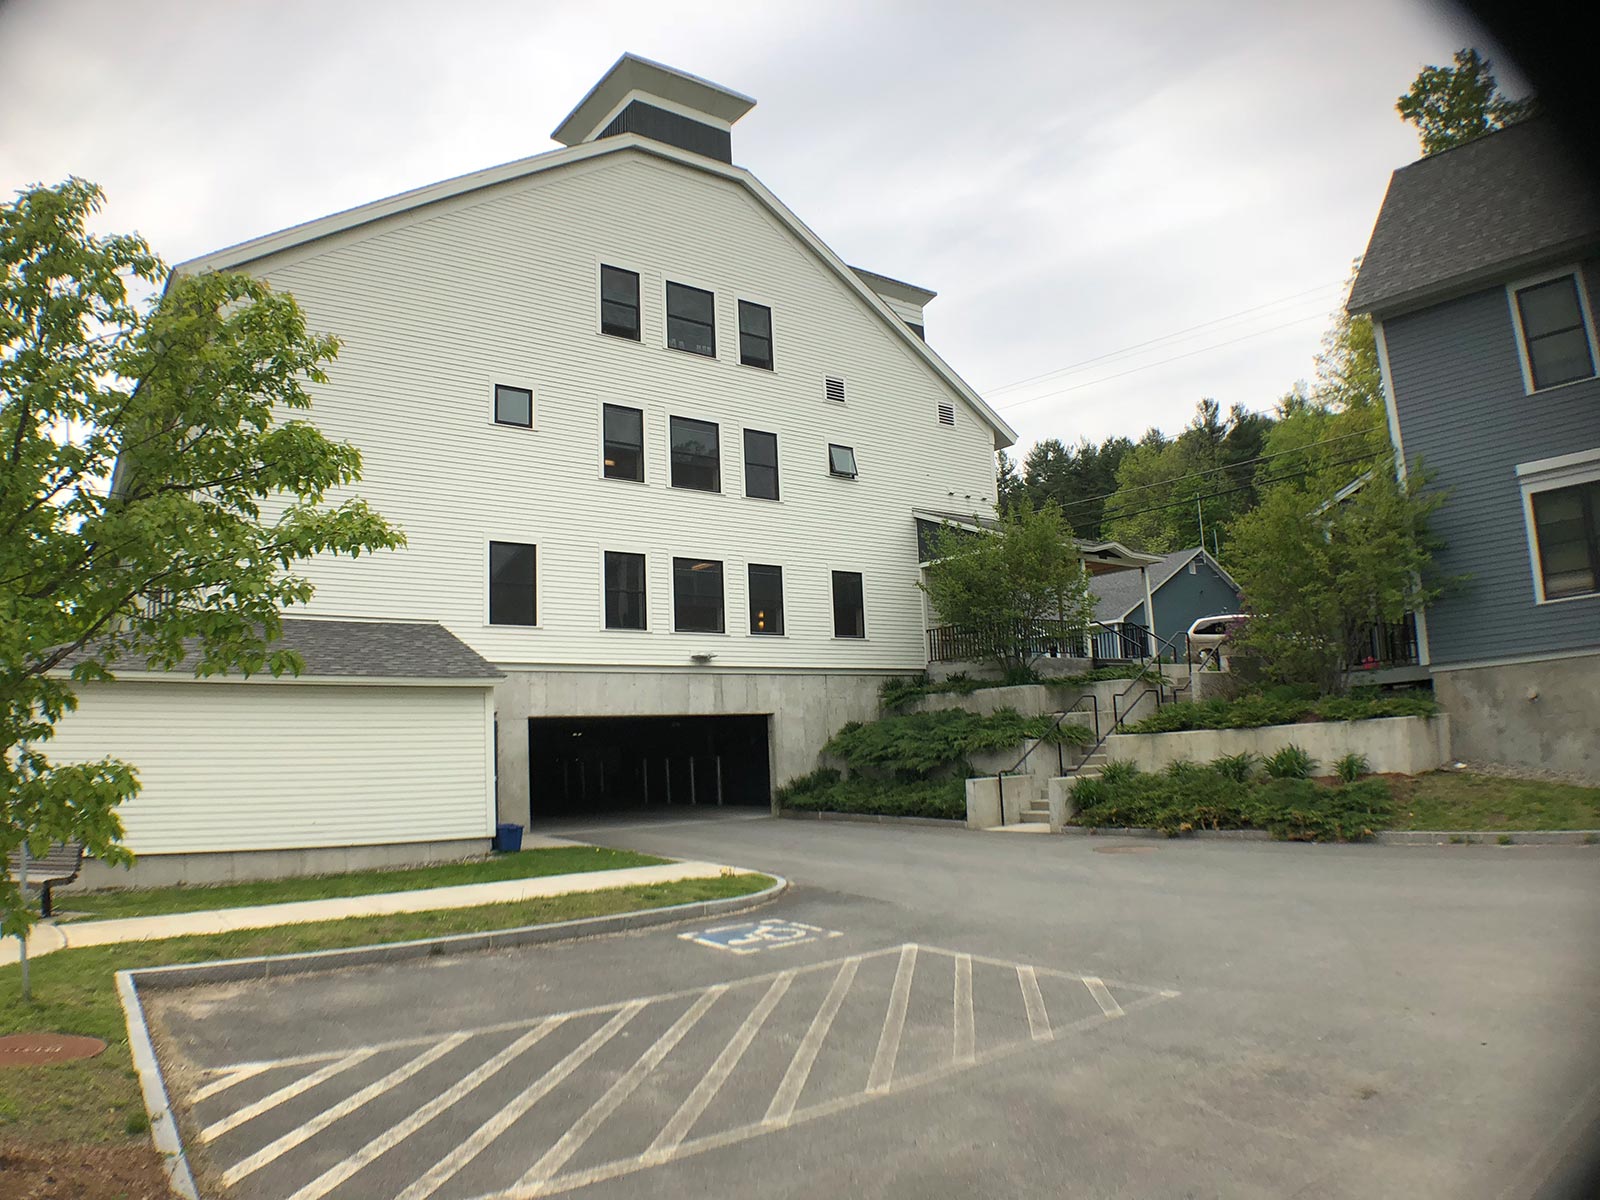 91 Guilford Center Road,Guilford,Vermont 05301,Apartment,Guilford Center Road ,1007